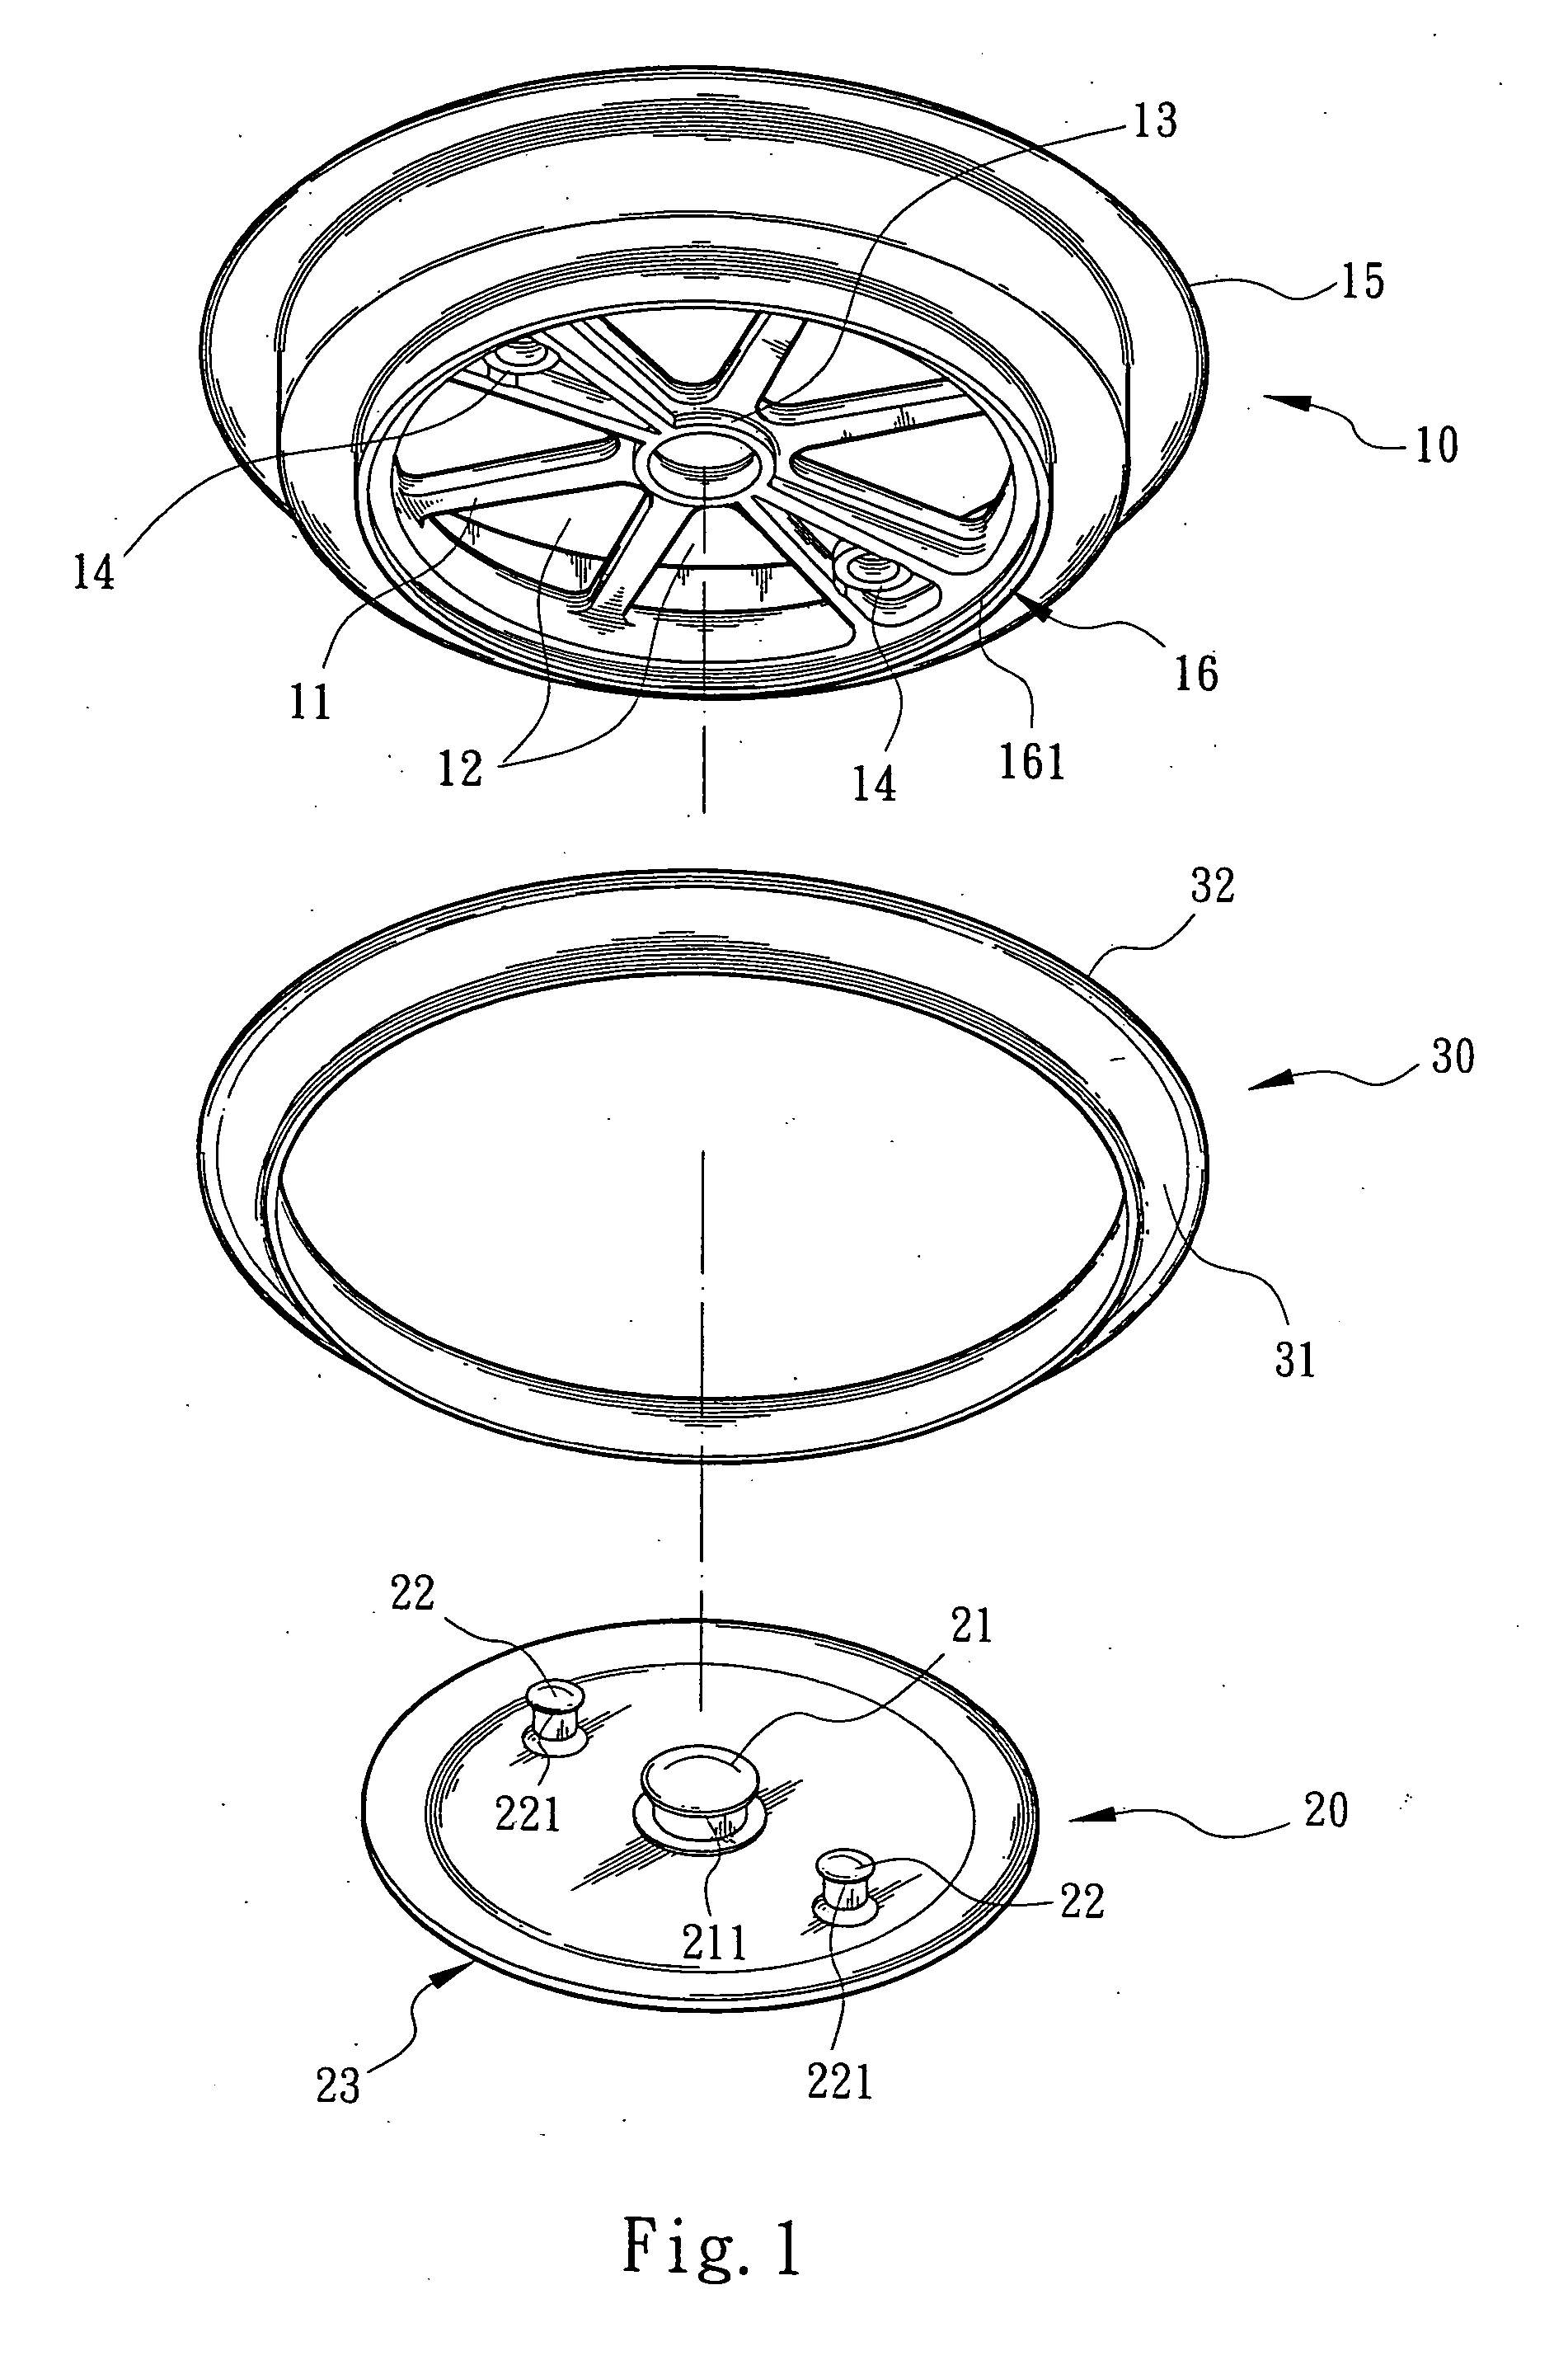 Sealing ring structure of a sinkhole